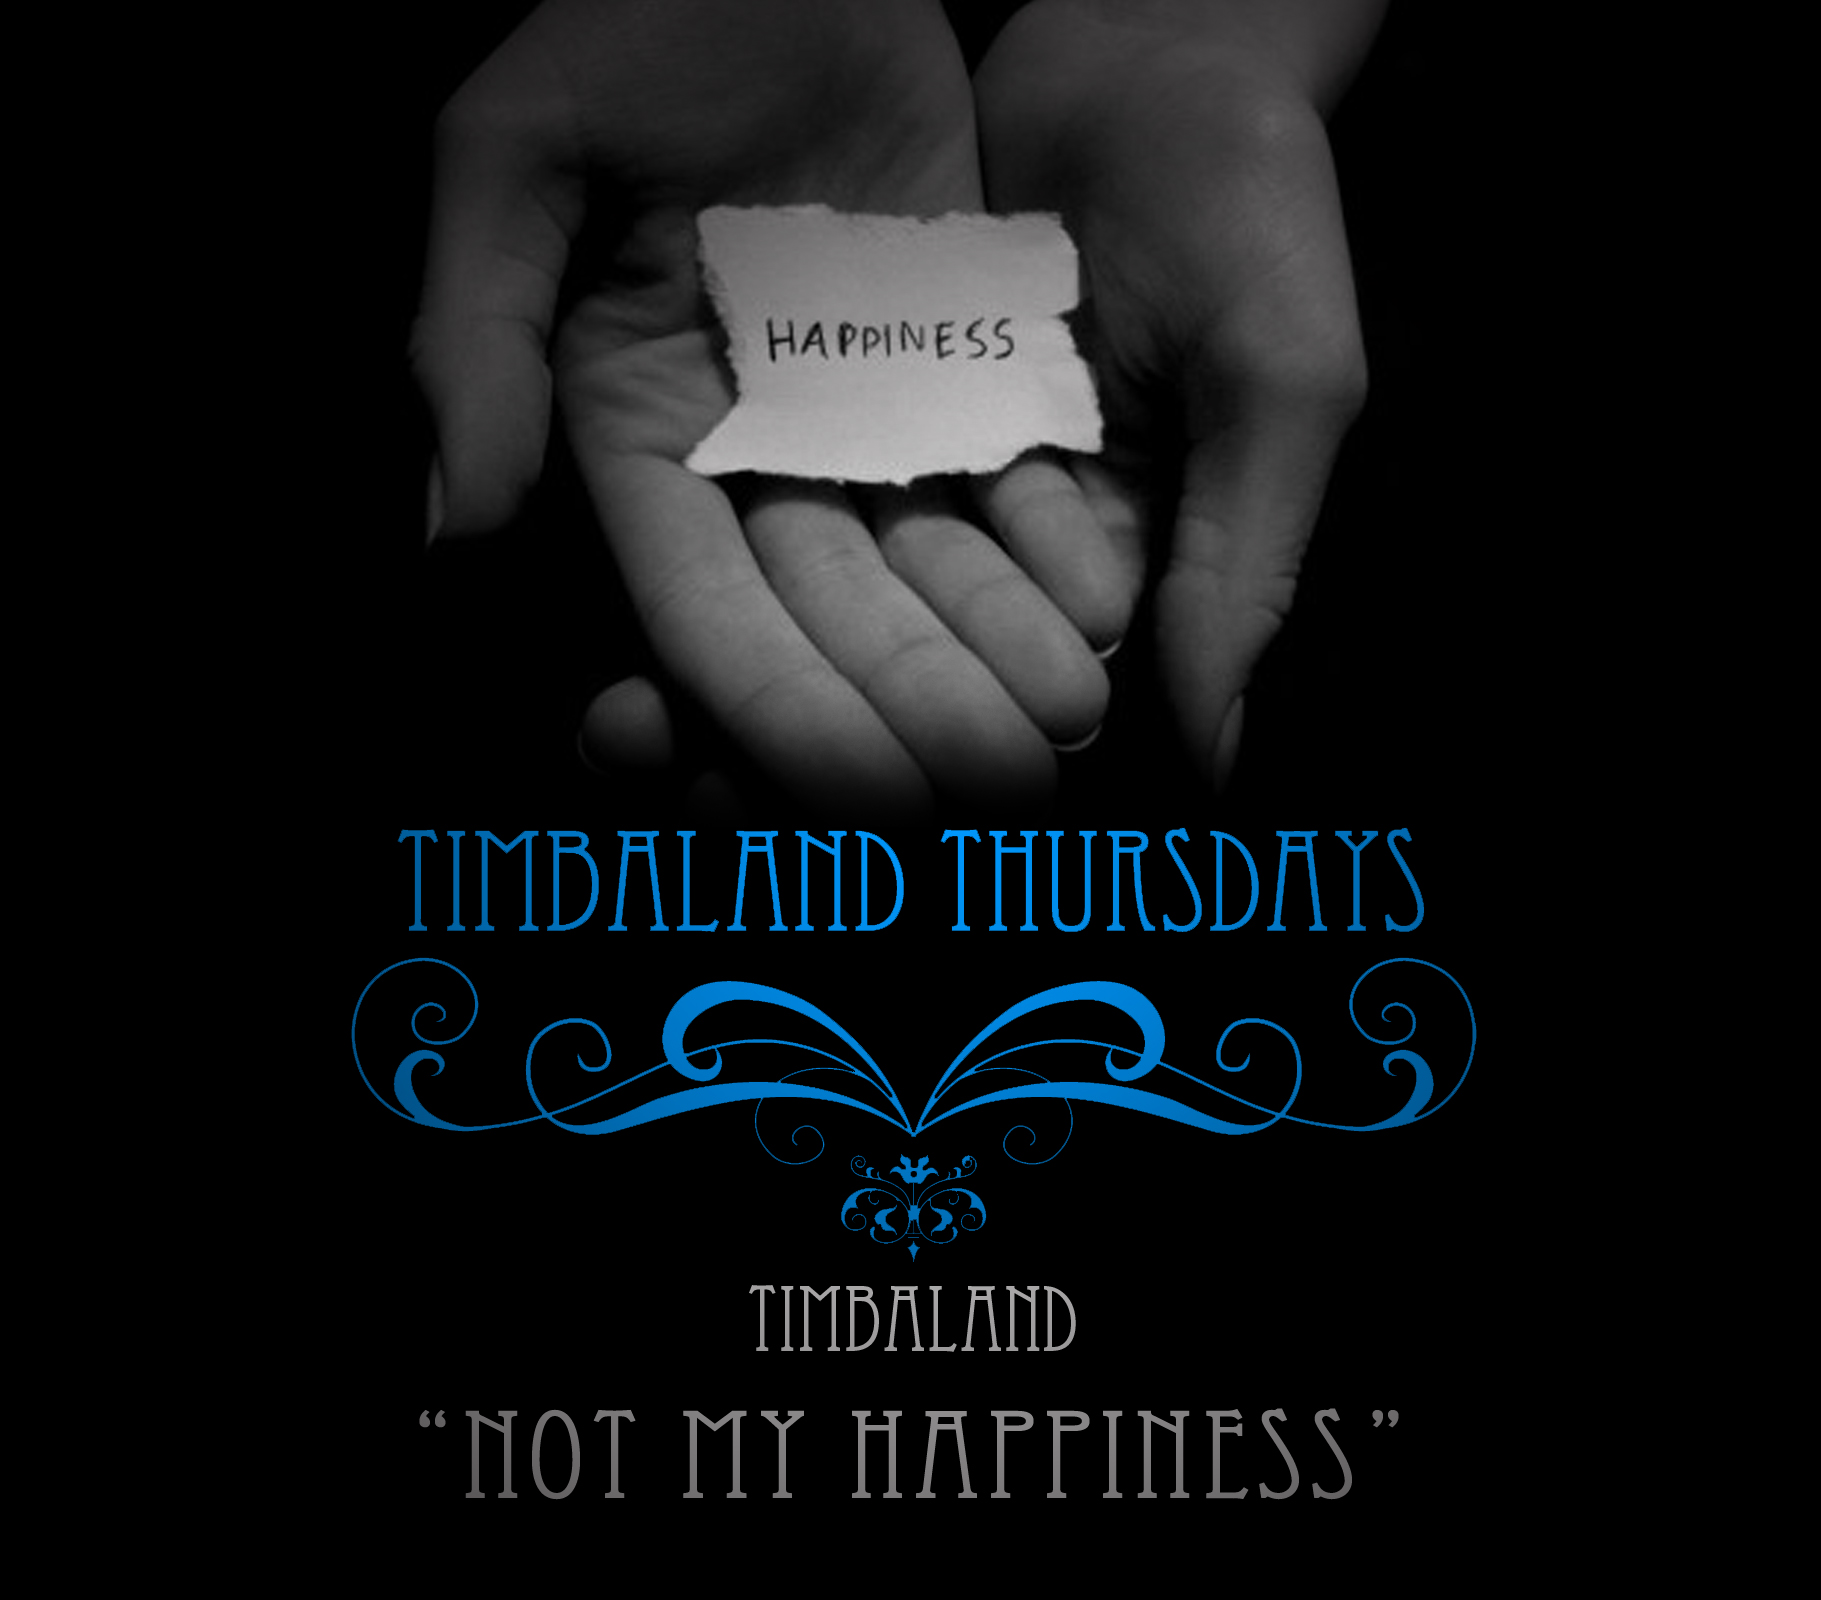 Timbaland – Not My Happiness